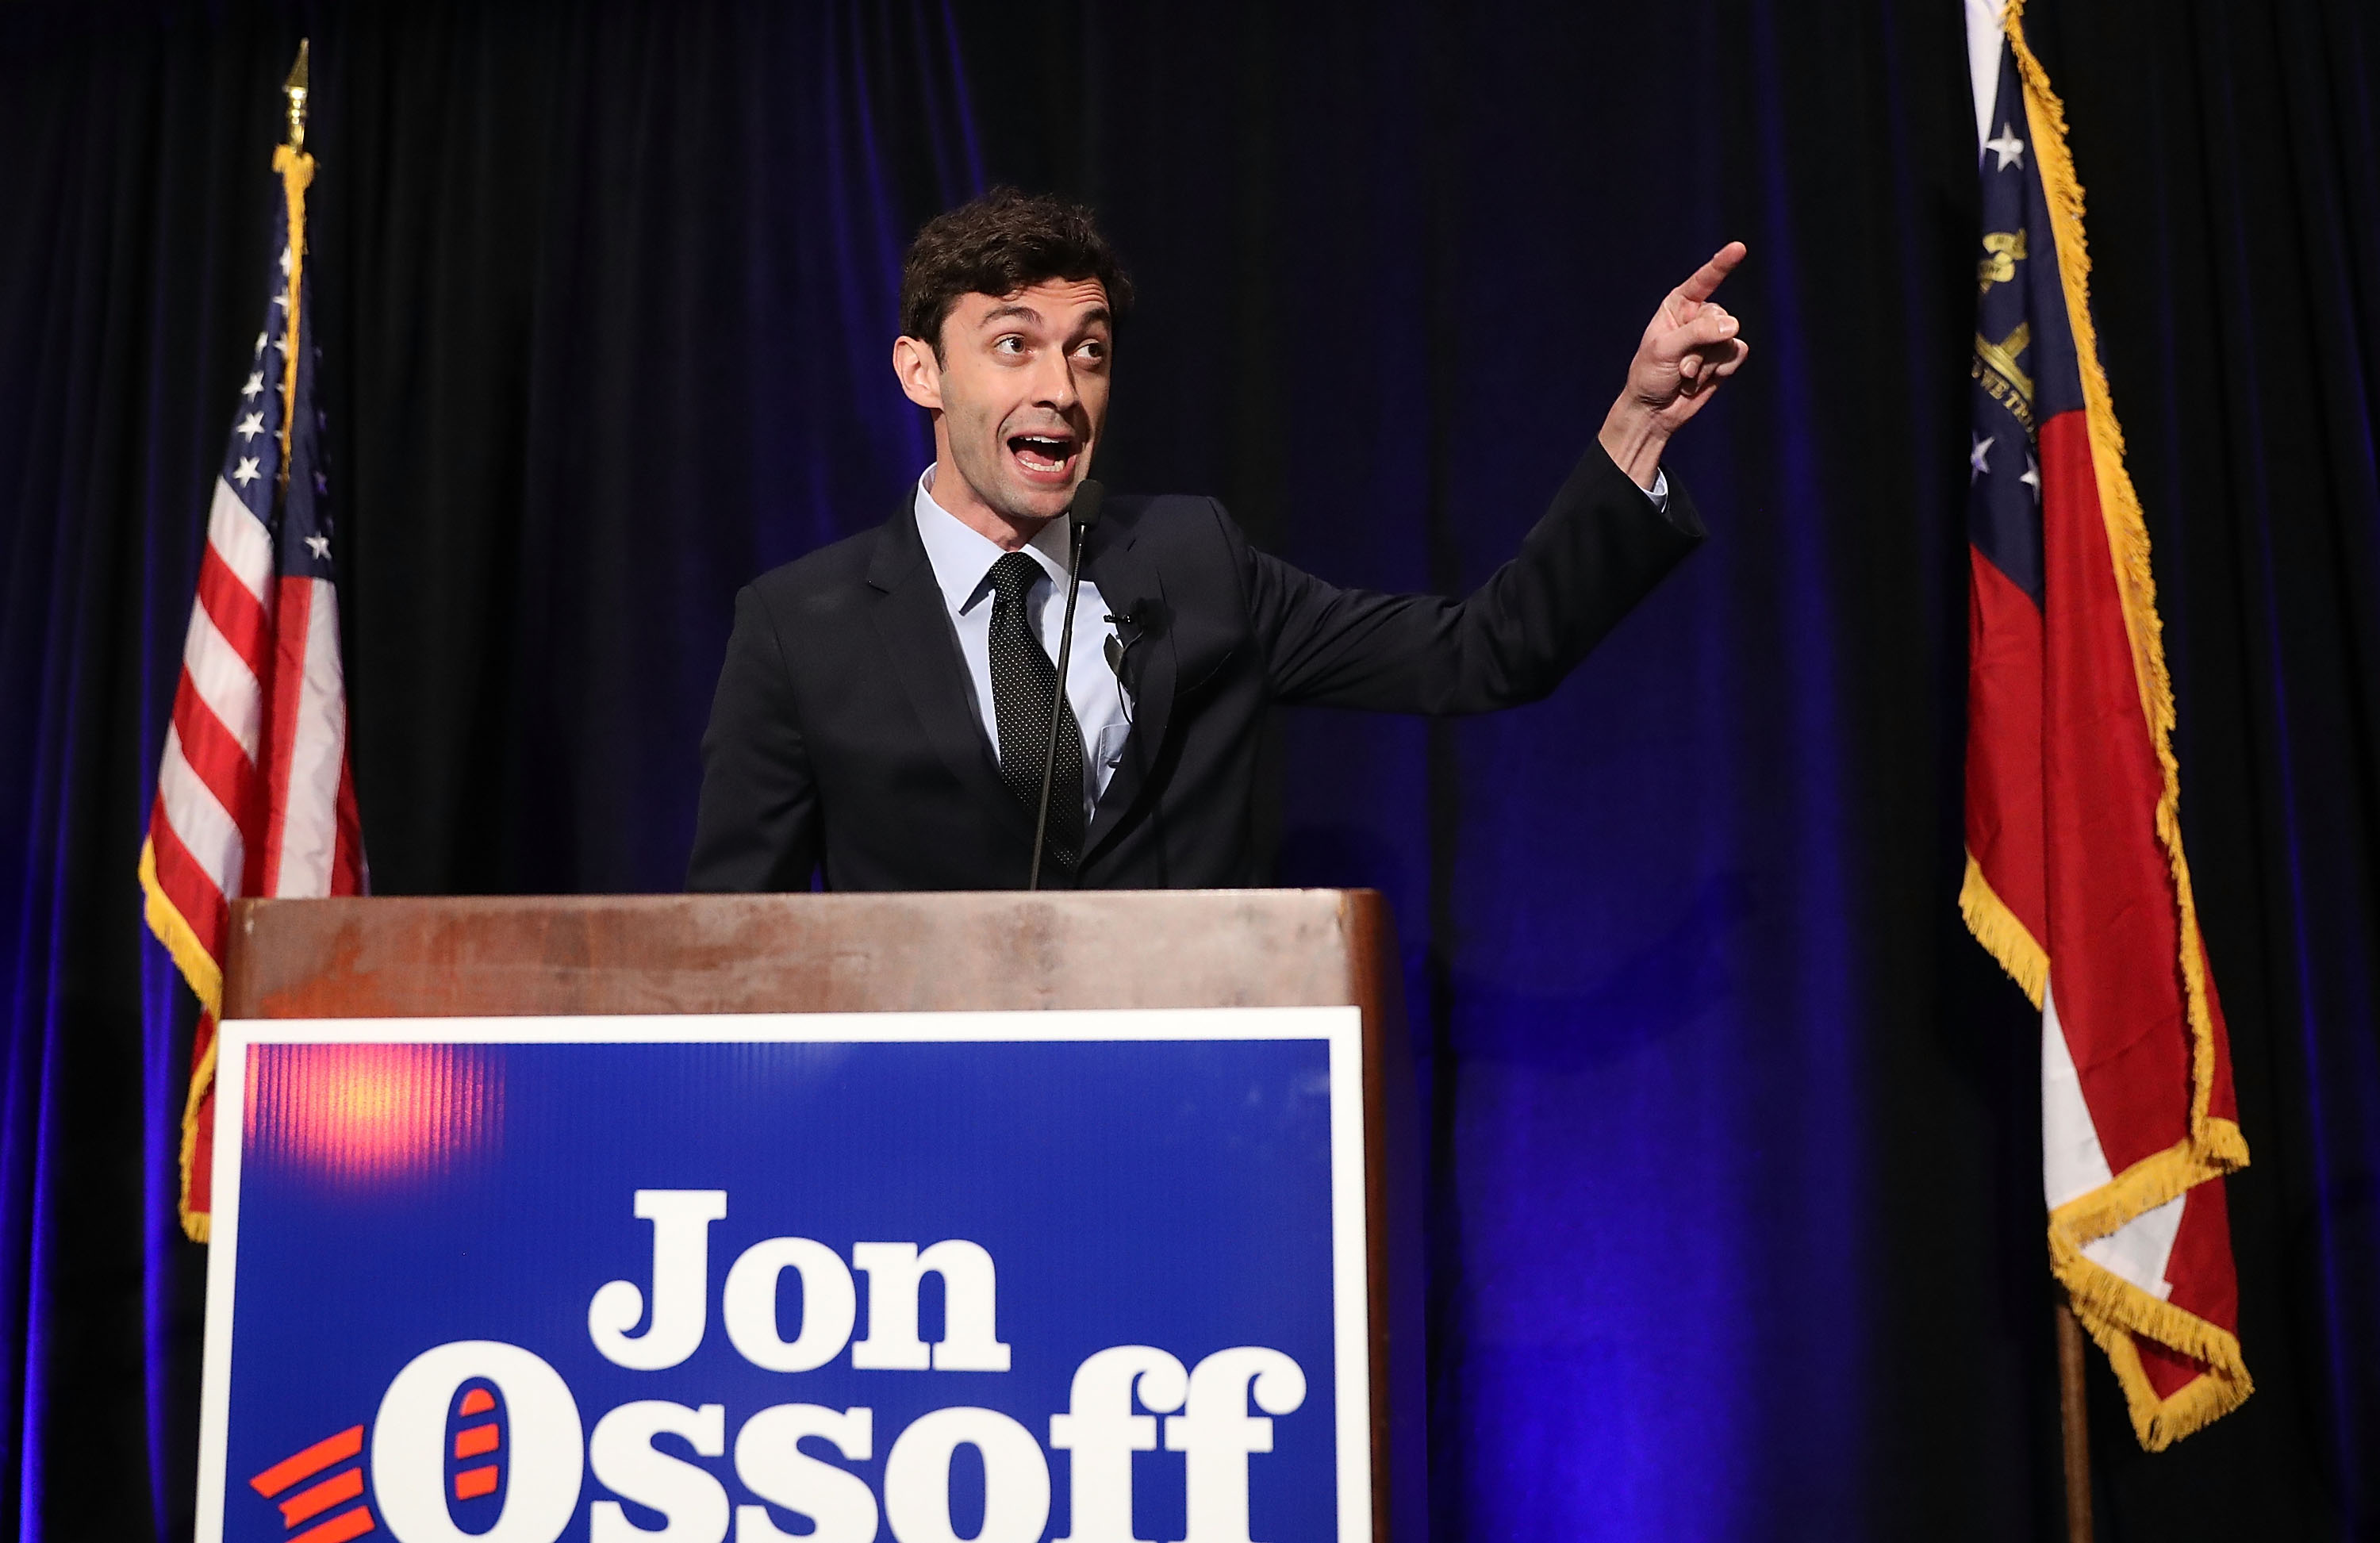 Jon Ossoff, Democratic candidate for Congress from Georgia.